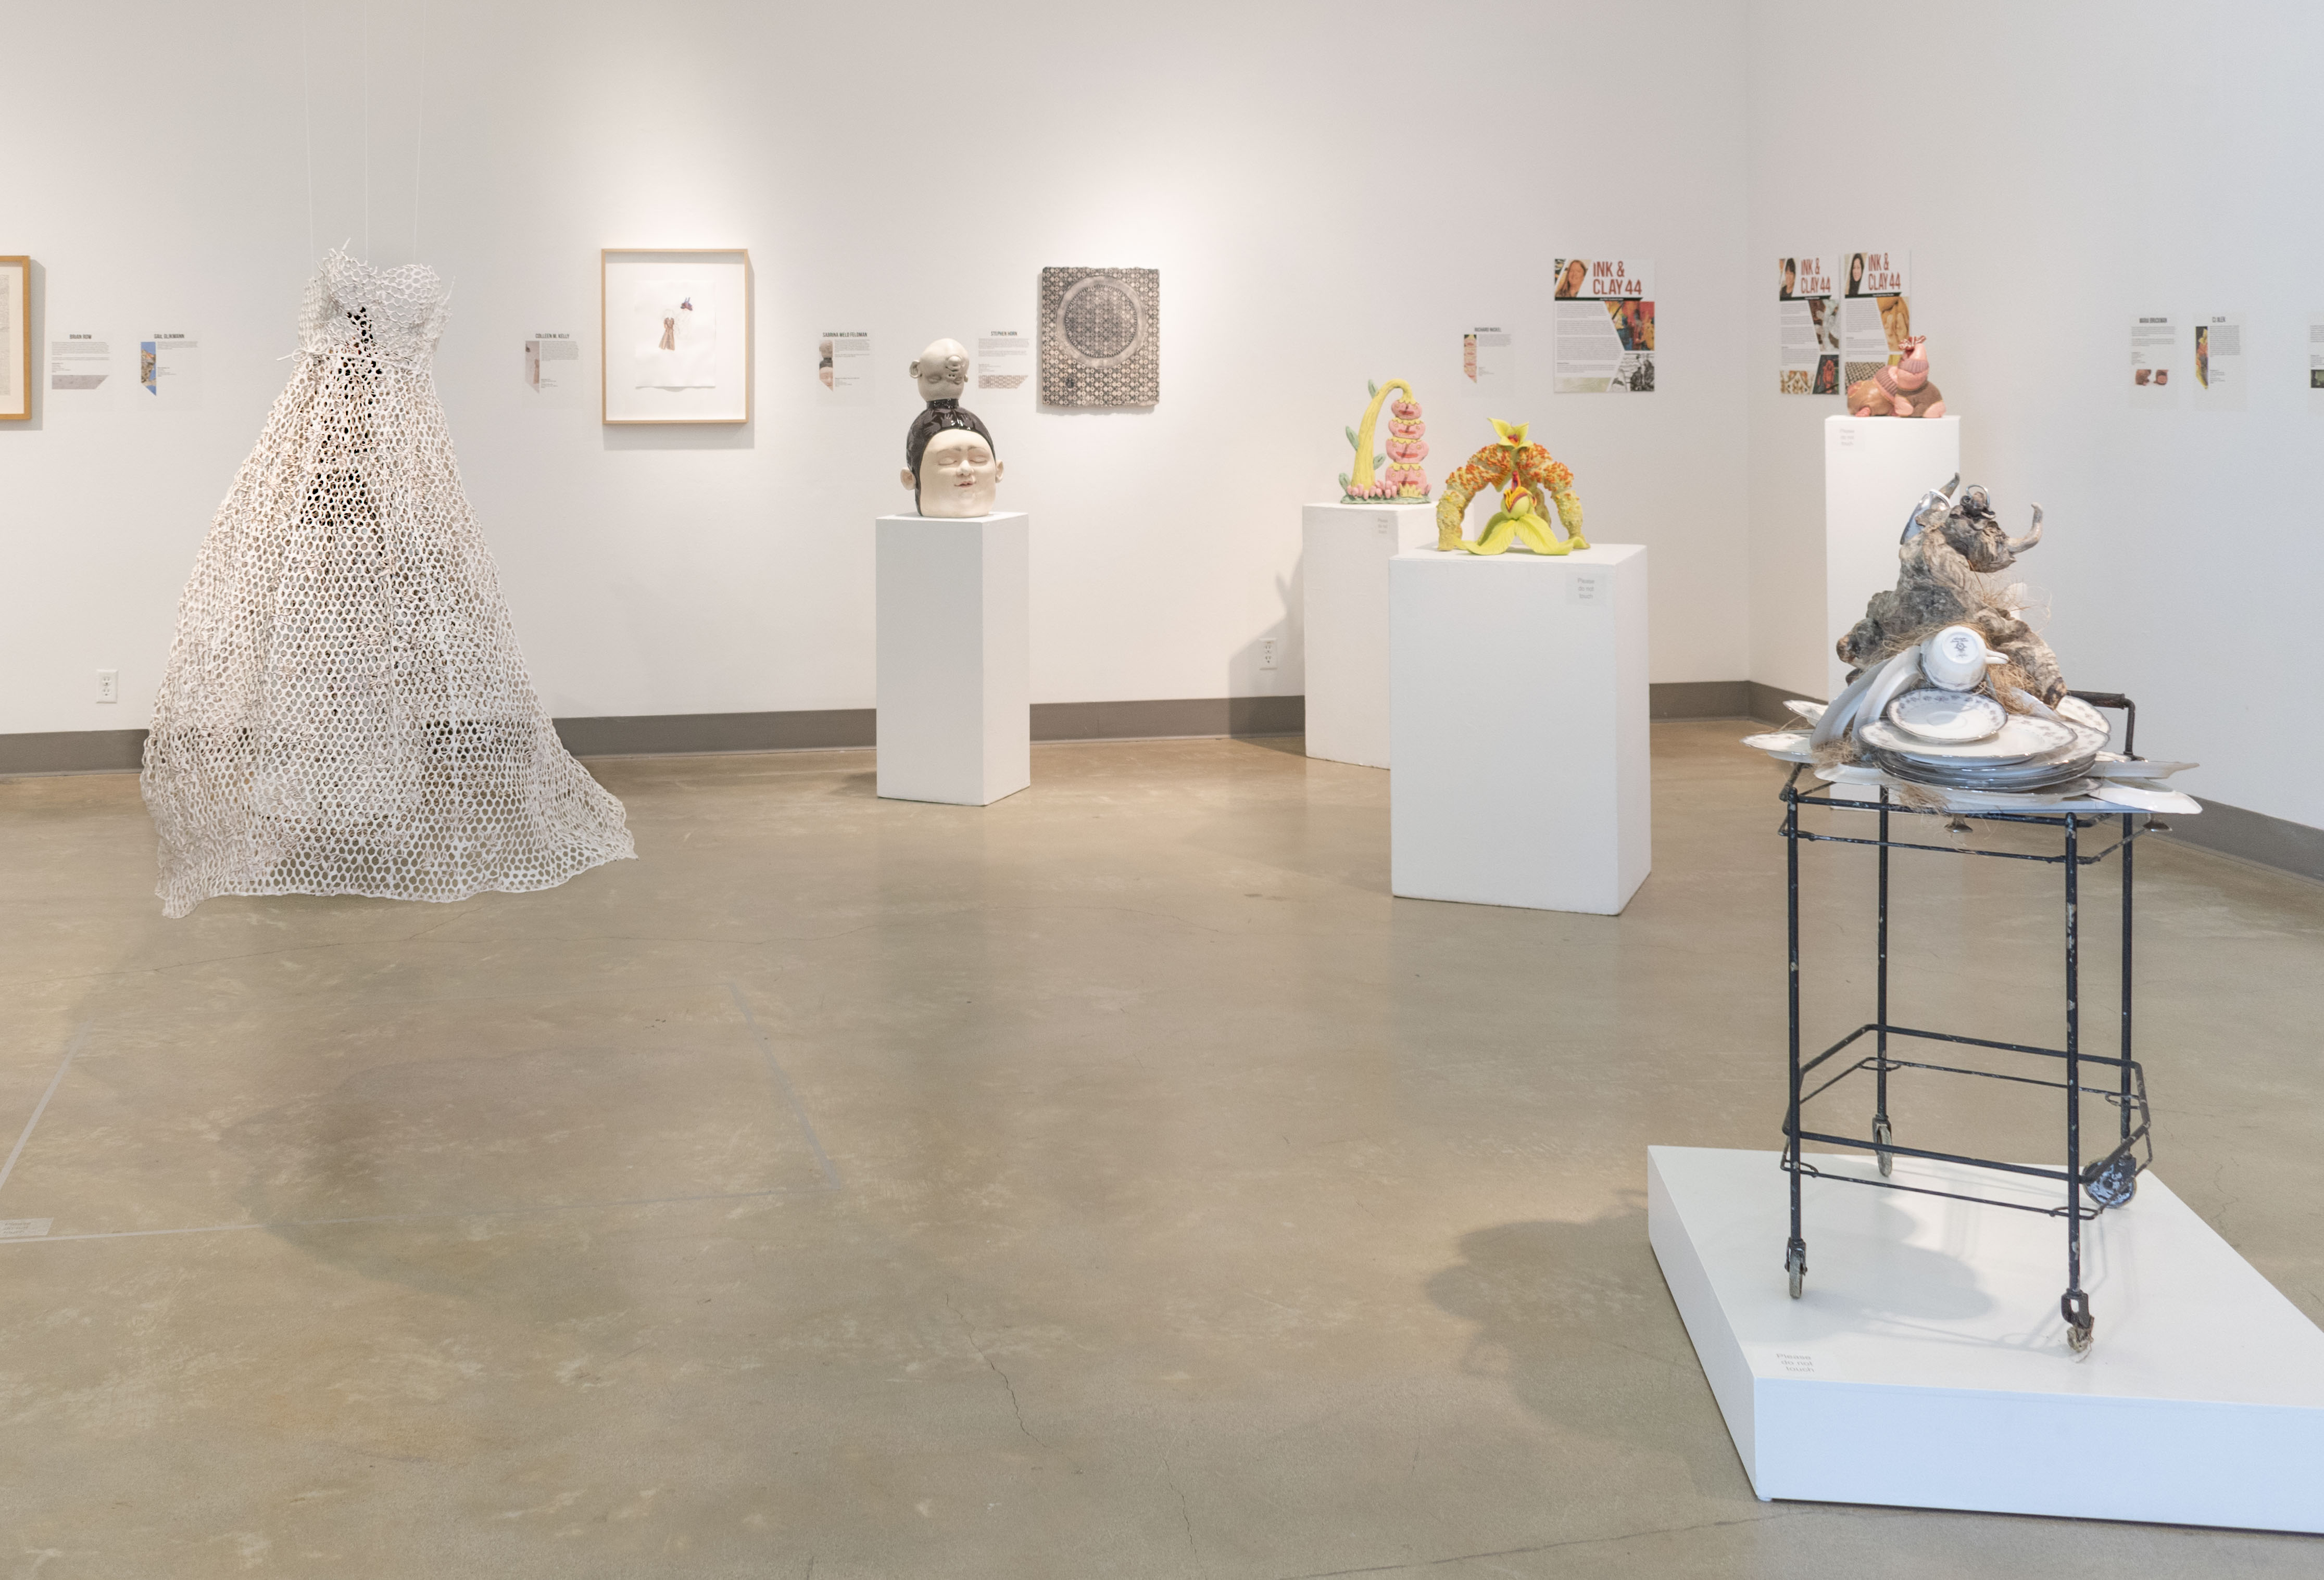 Installation View, Front East Gallery, Ink & Clay 44 Exhibition, Aug. 22, 2019 to Nov. 21, 2019.